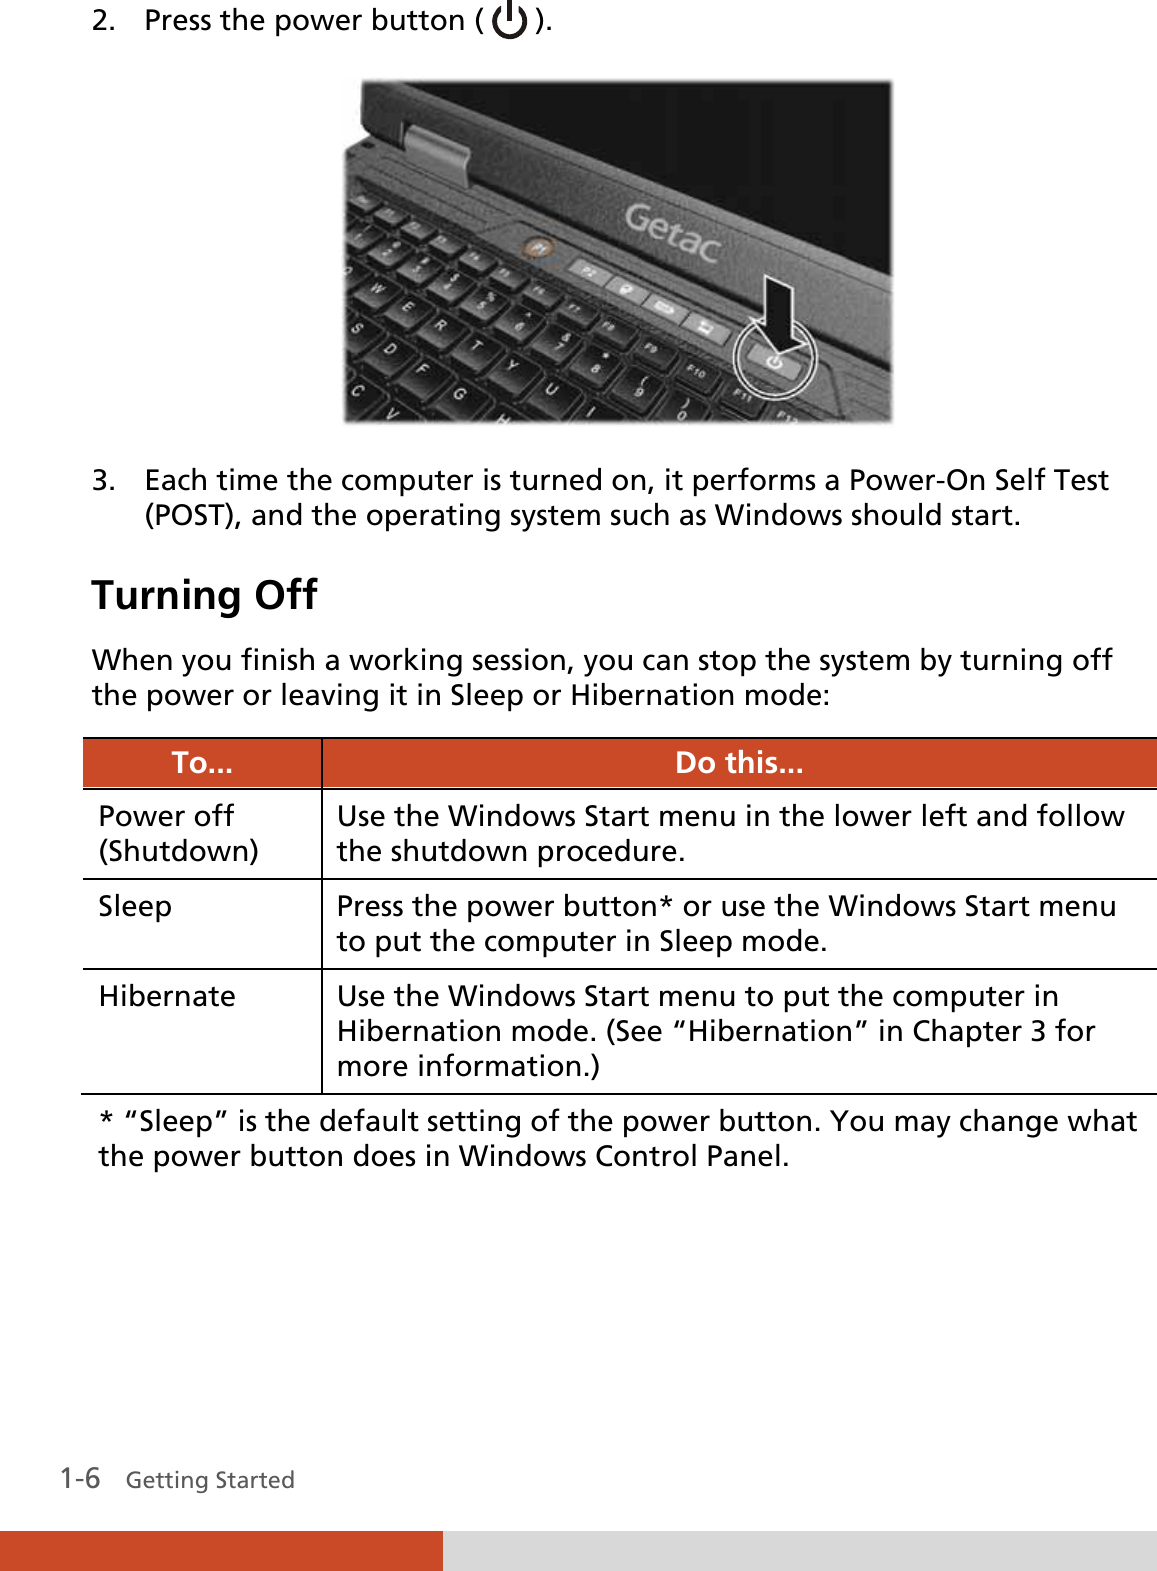  1-6   Getting Started 2. Press the power button (   ).  3. Each time the computer is turned on, it performs a Power-On Self Test (POST), and the operating system such as Windows should start. Turning Off When you finish a working session, you can stop the system by turning off the power or leaving it in Sleep or Hibernation mode: To...  Do this... Power off (Shutdown) Use the Windows Start menu in the lower left and follow the shutdown procedure. Sleep  Press the power button* or use the Windows Start menu to put the computer in Sleep mode. Hibernate  Use the Windows Start menu to put the computer in Hibernation mode. (See “Hibernation” in Chapter 3 for more information.) * “Sleep” is the default setting of the power button. You may change what the power button does in Windows Control Panel. 